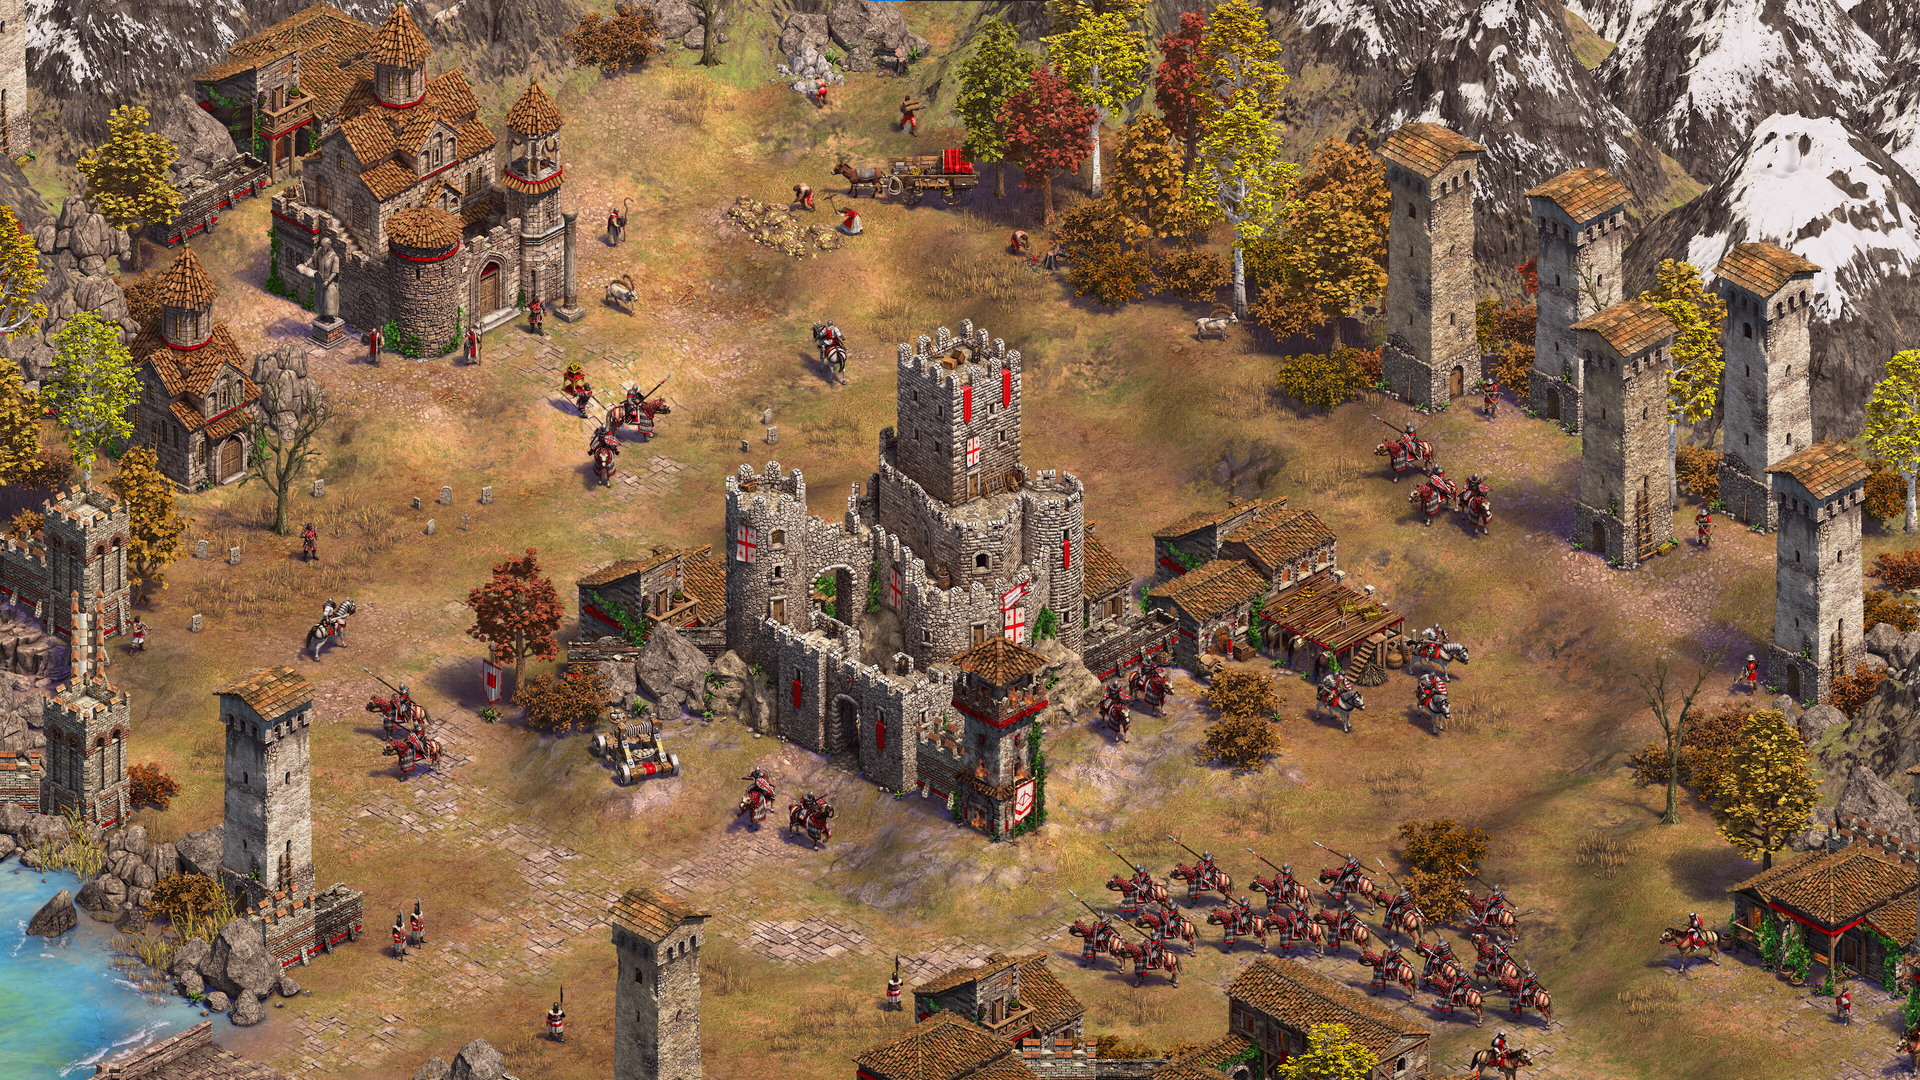 Age of Empires II: Definitive Edition - The Mountain Royals - screenshot 4